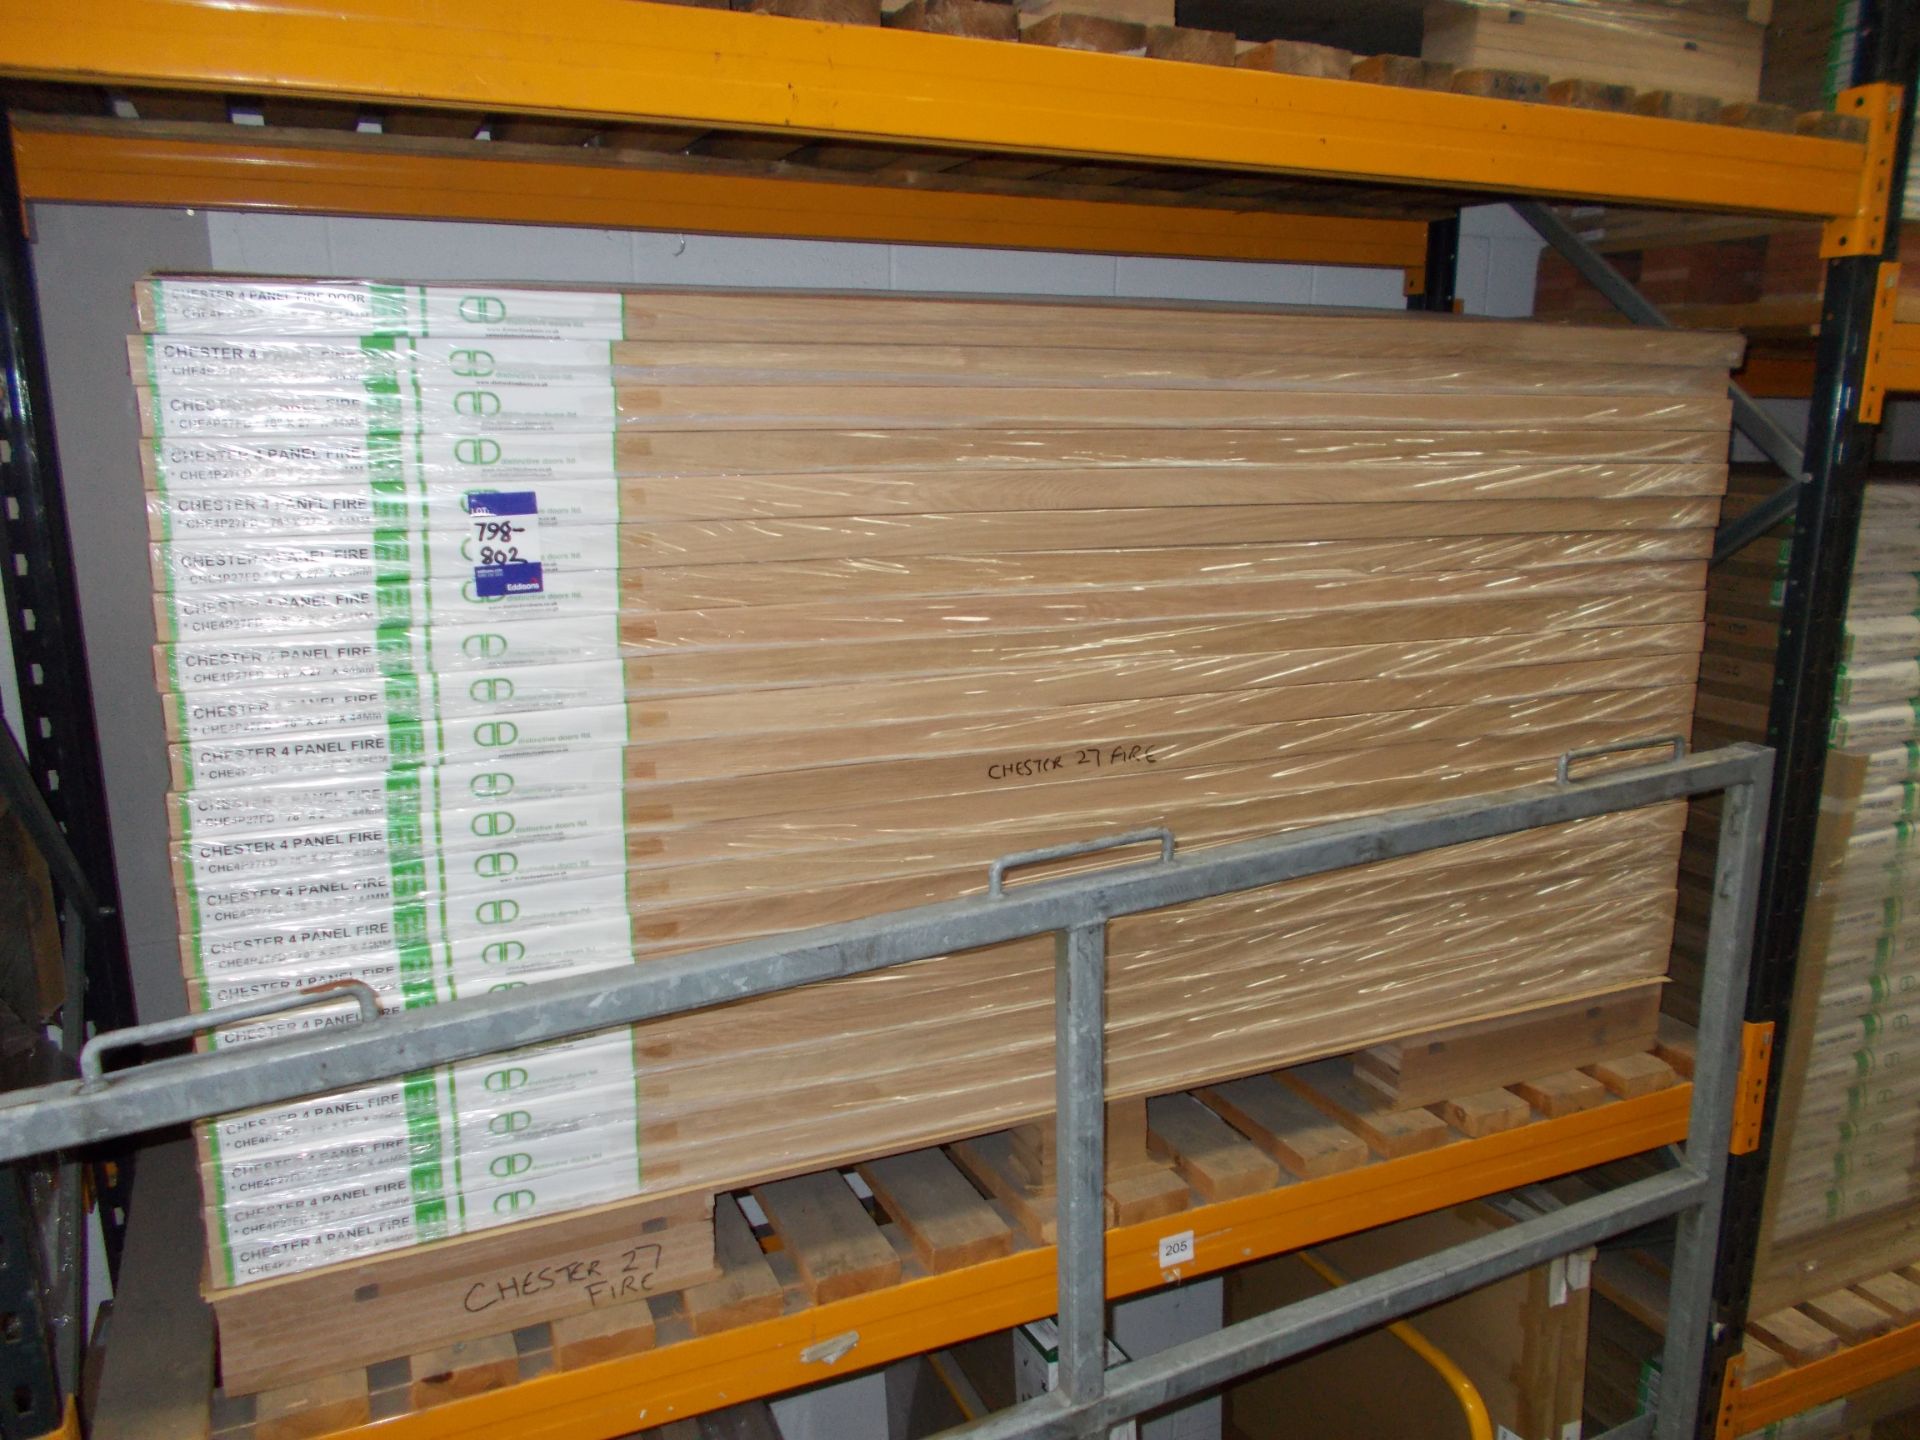 4 x Chester 4 Panel Internal Fire Door CHE4P27FD, 78”x27”x44mm - Lots to be handed out in order they - Image 2 of 3